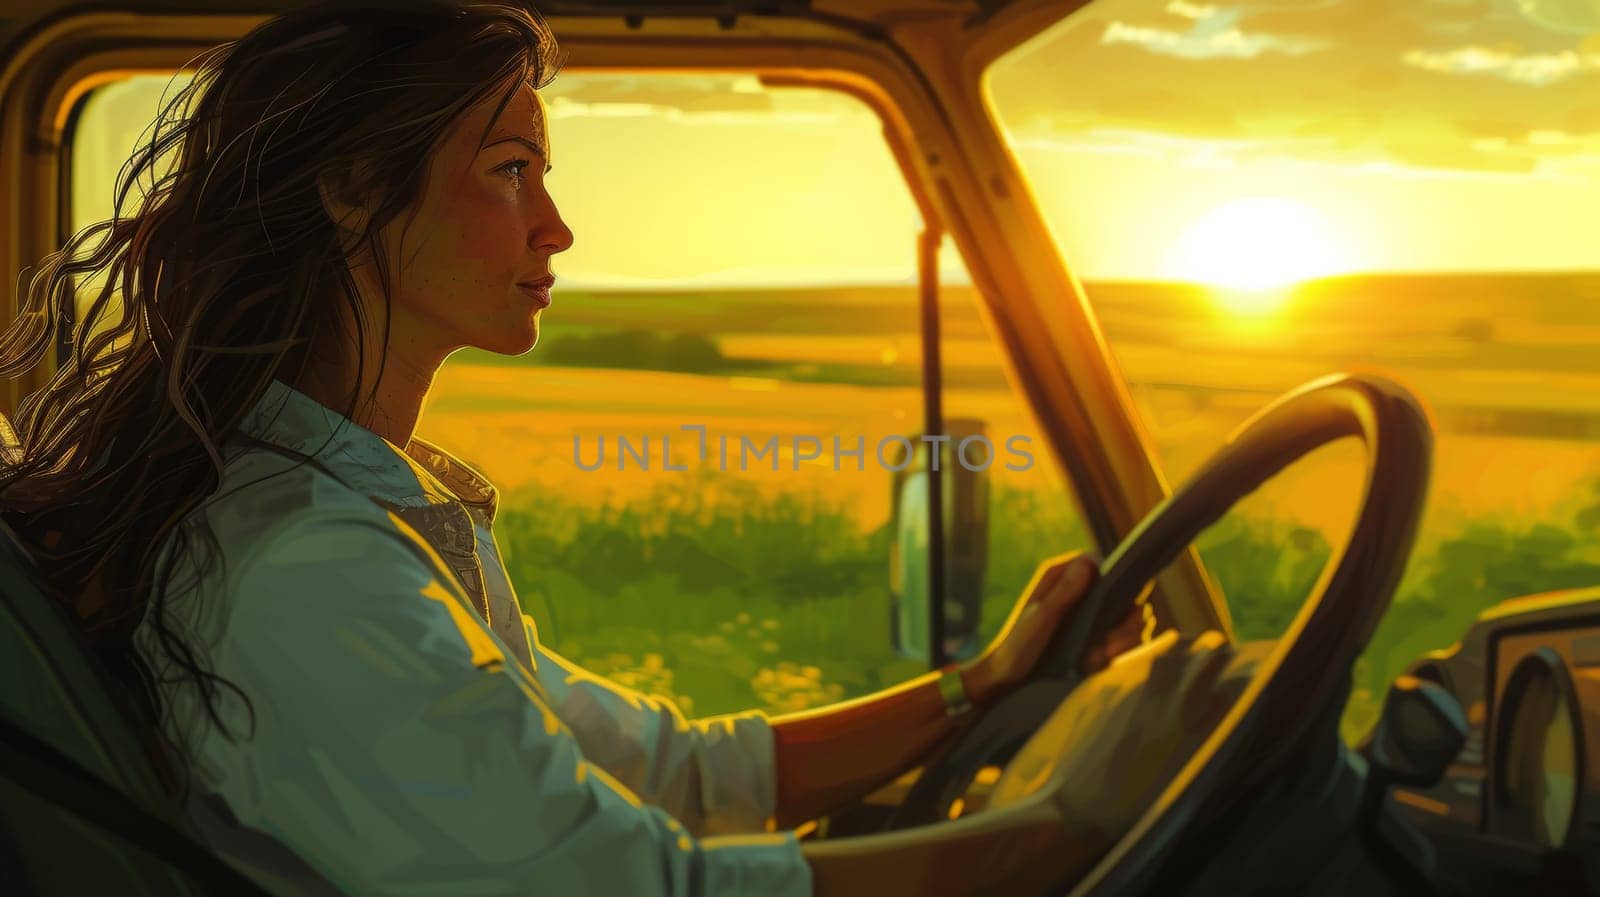 A woman driving a truck at sunset with the sun setting behind her